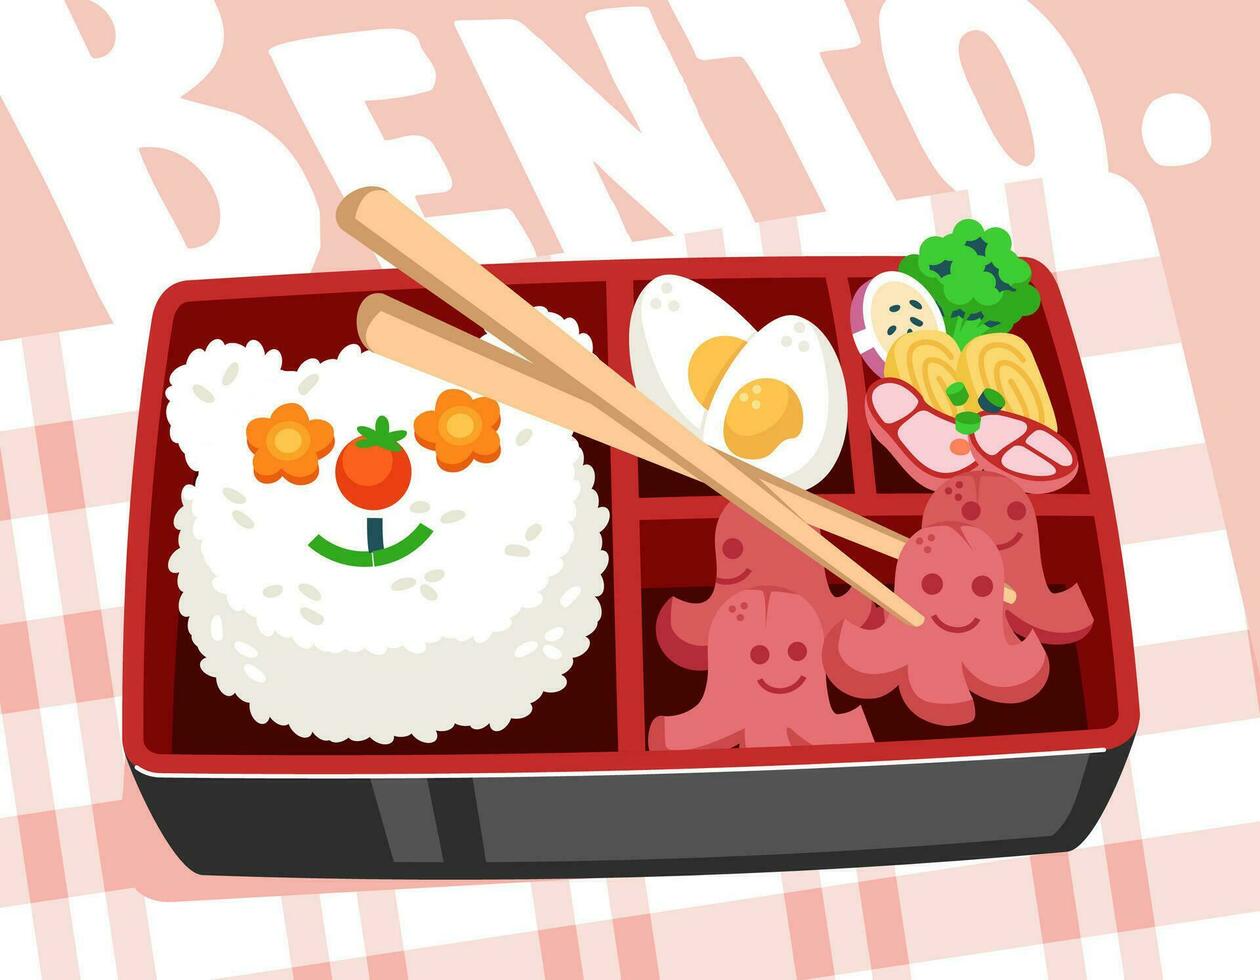 cute japanese lunch box or bento, with rice and side dishes vector illustration